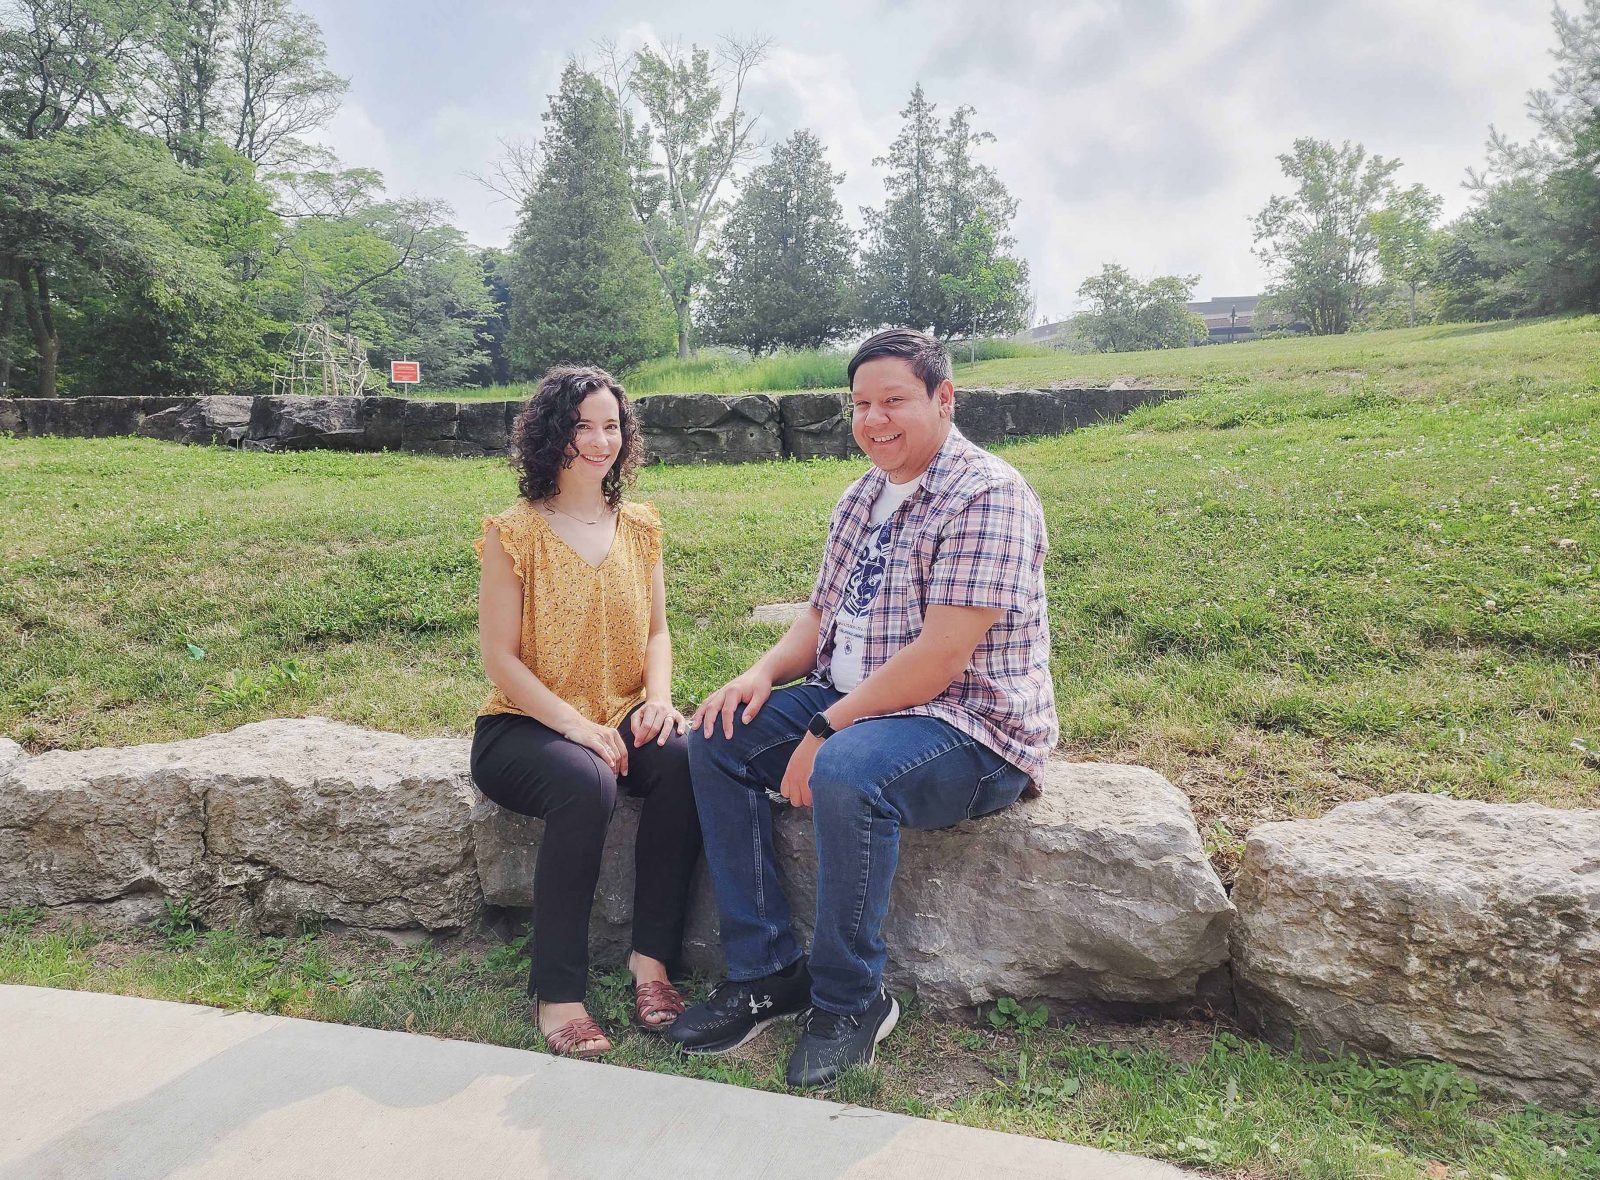 A woman and man sit next to each other on a rock in front of a grassy field.